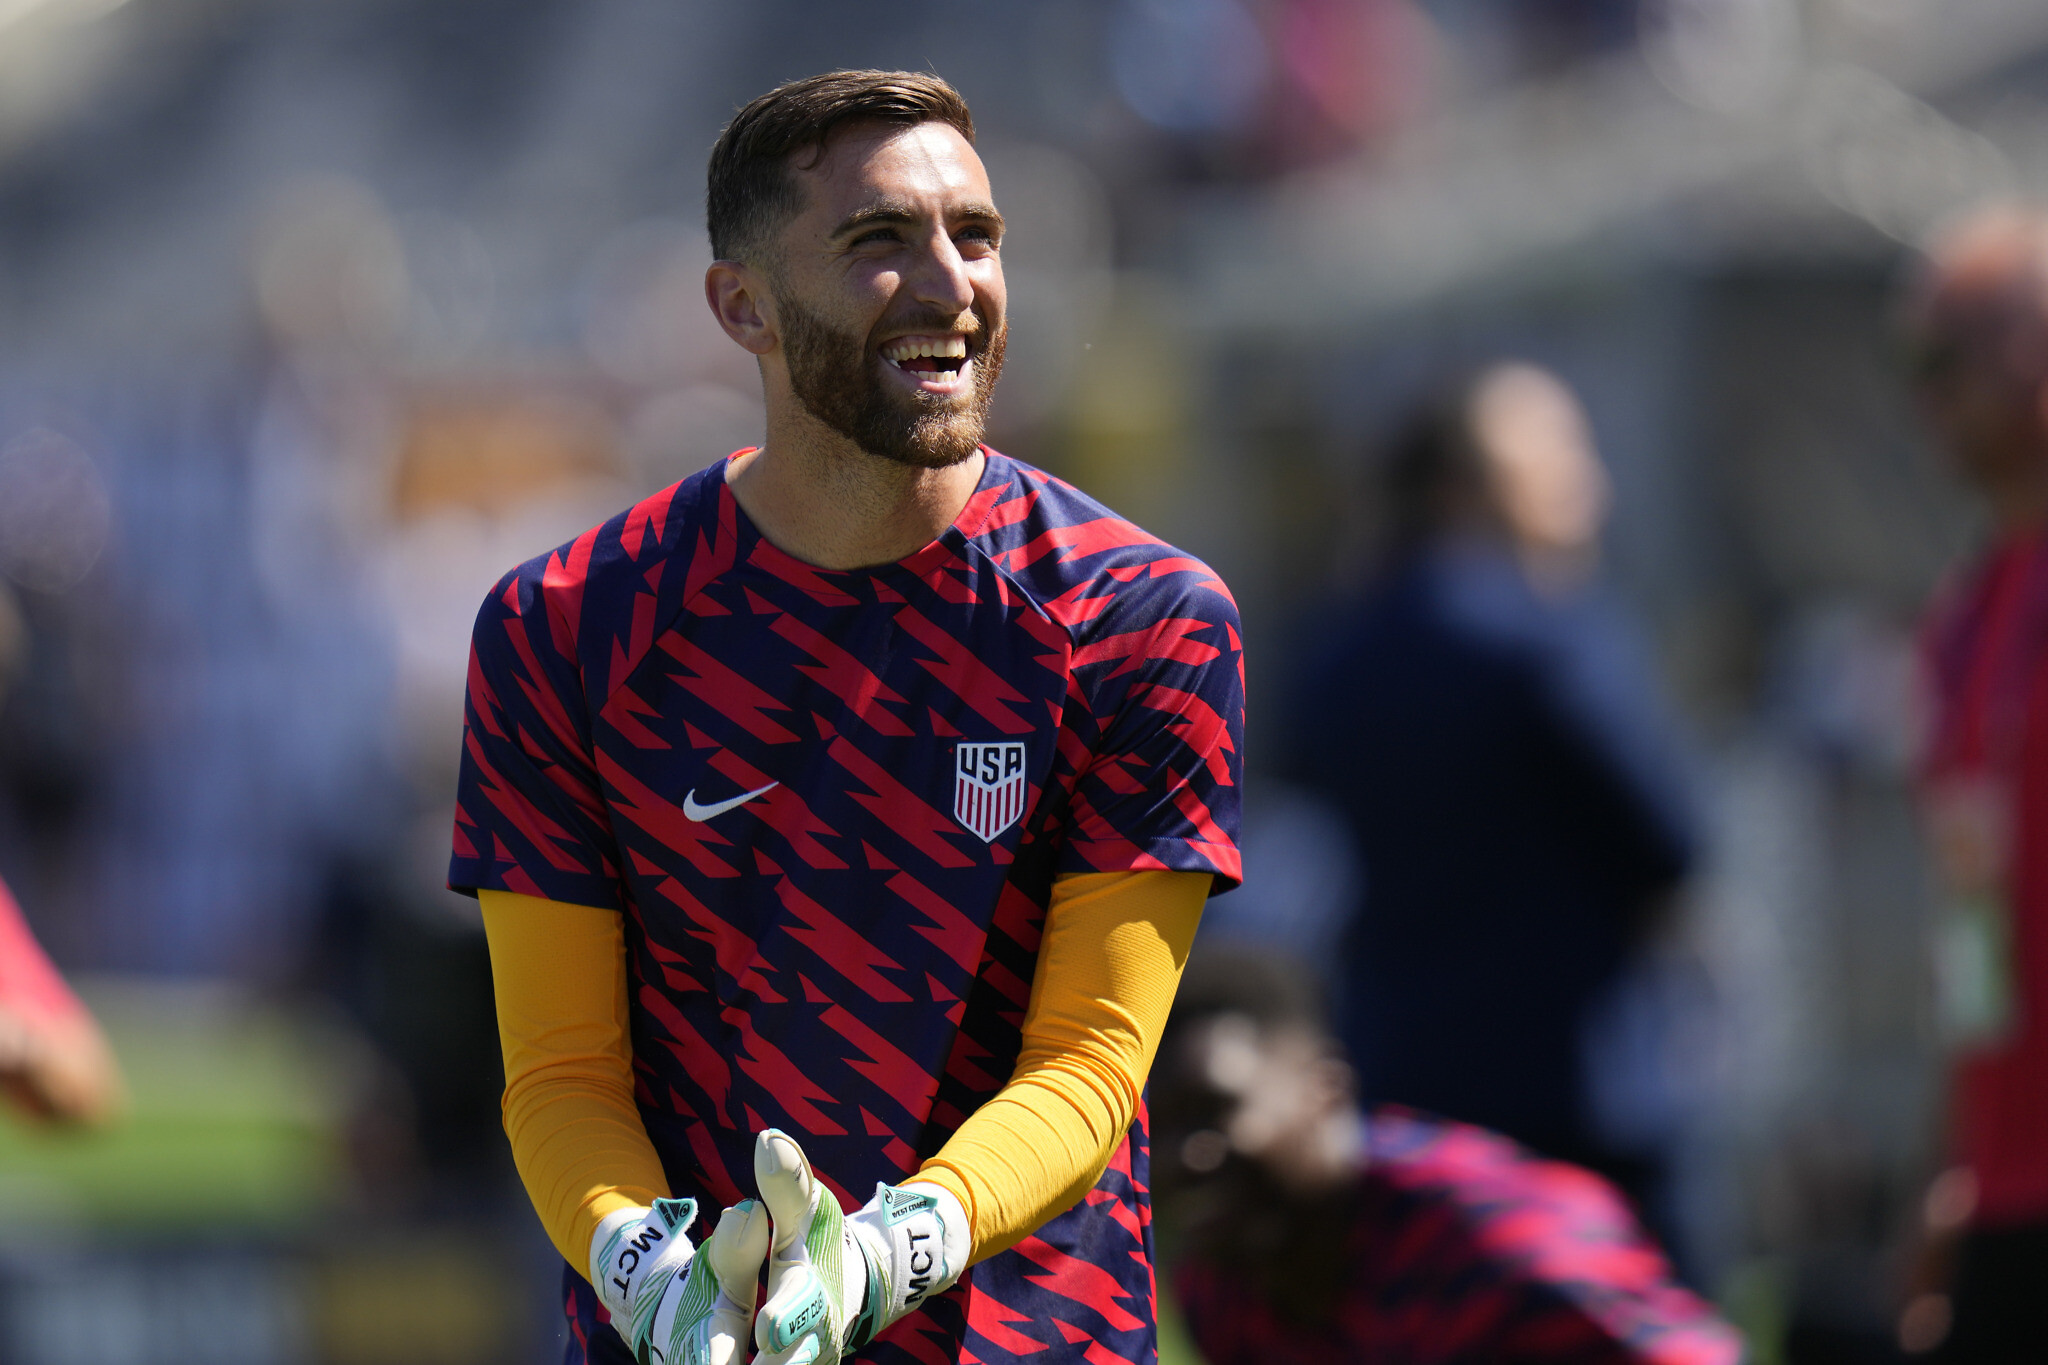 A chance discovery connects US soccer star Matt Turner to his Jewish roots